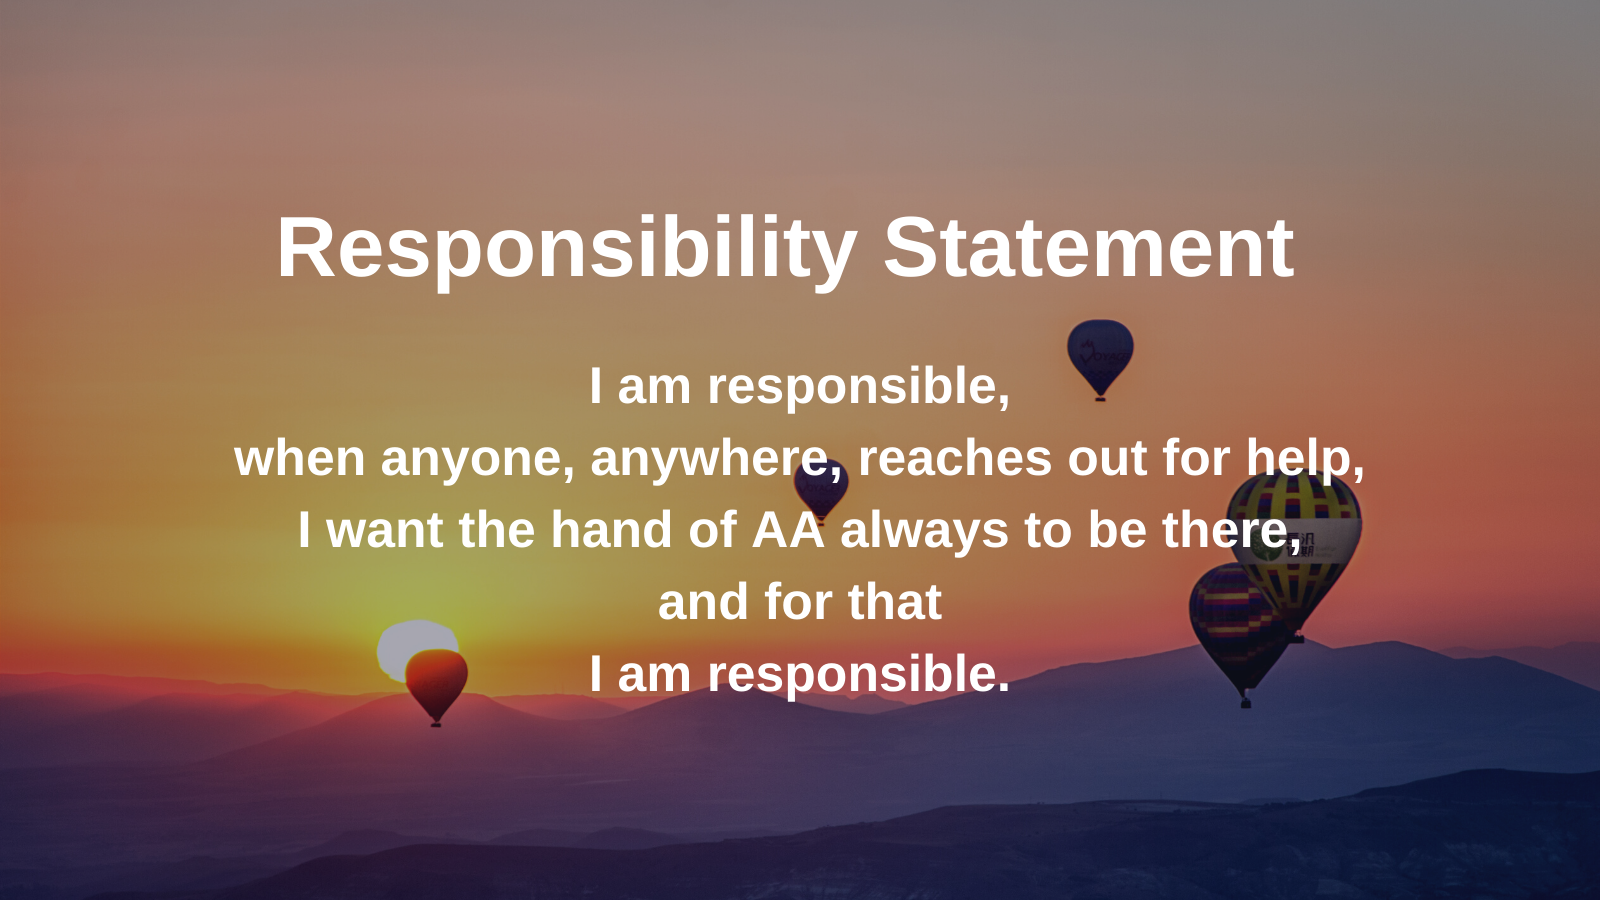 I am responsible, when anyone, anywhere, reaches out for help, I want the hand of AA to always be there, and for that I am responsible.